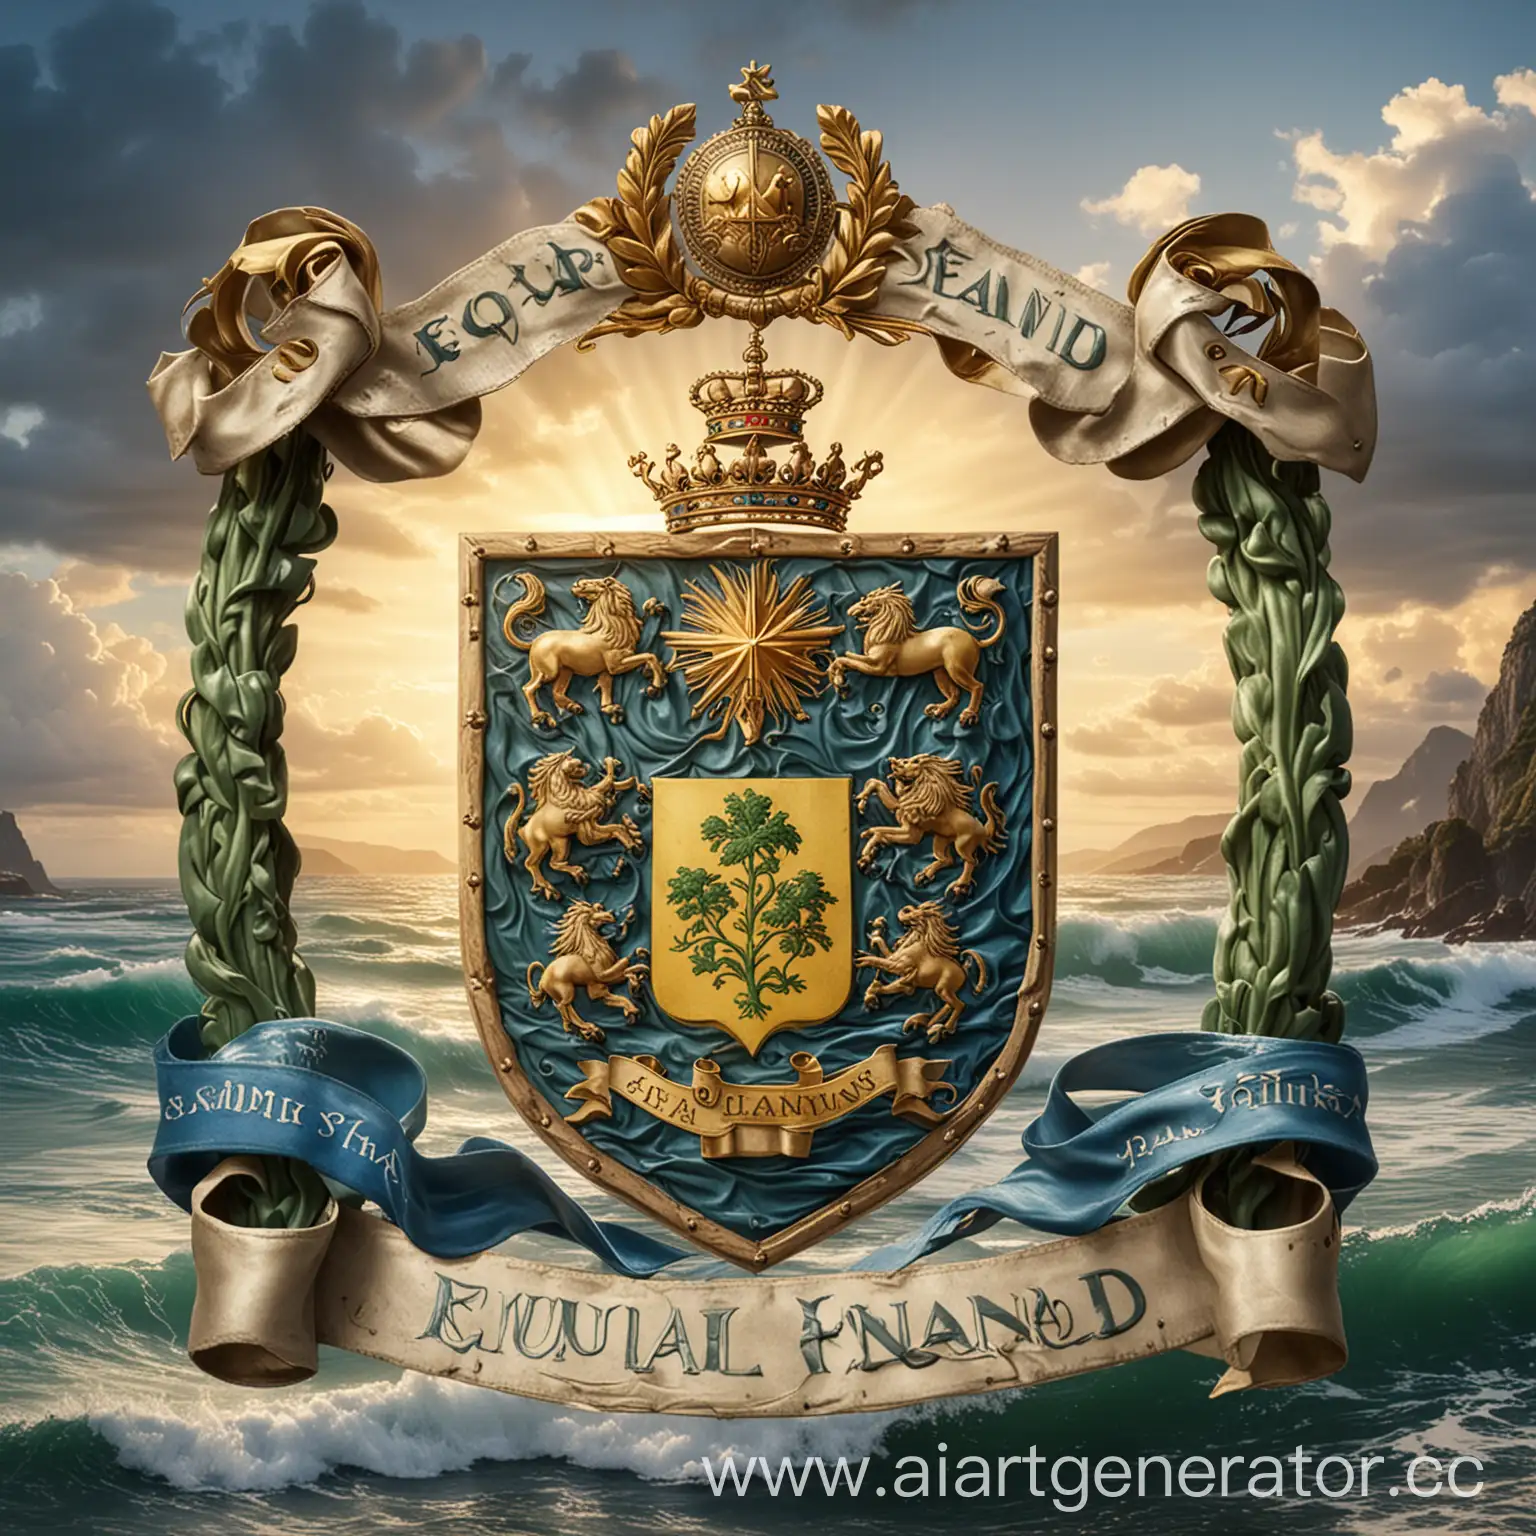 Equiland-Coat-of-Arms-Island-Waves-and-Golden-Sun